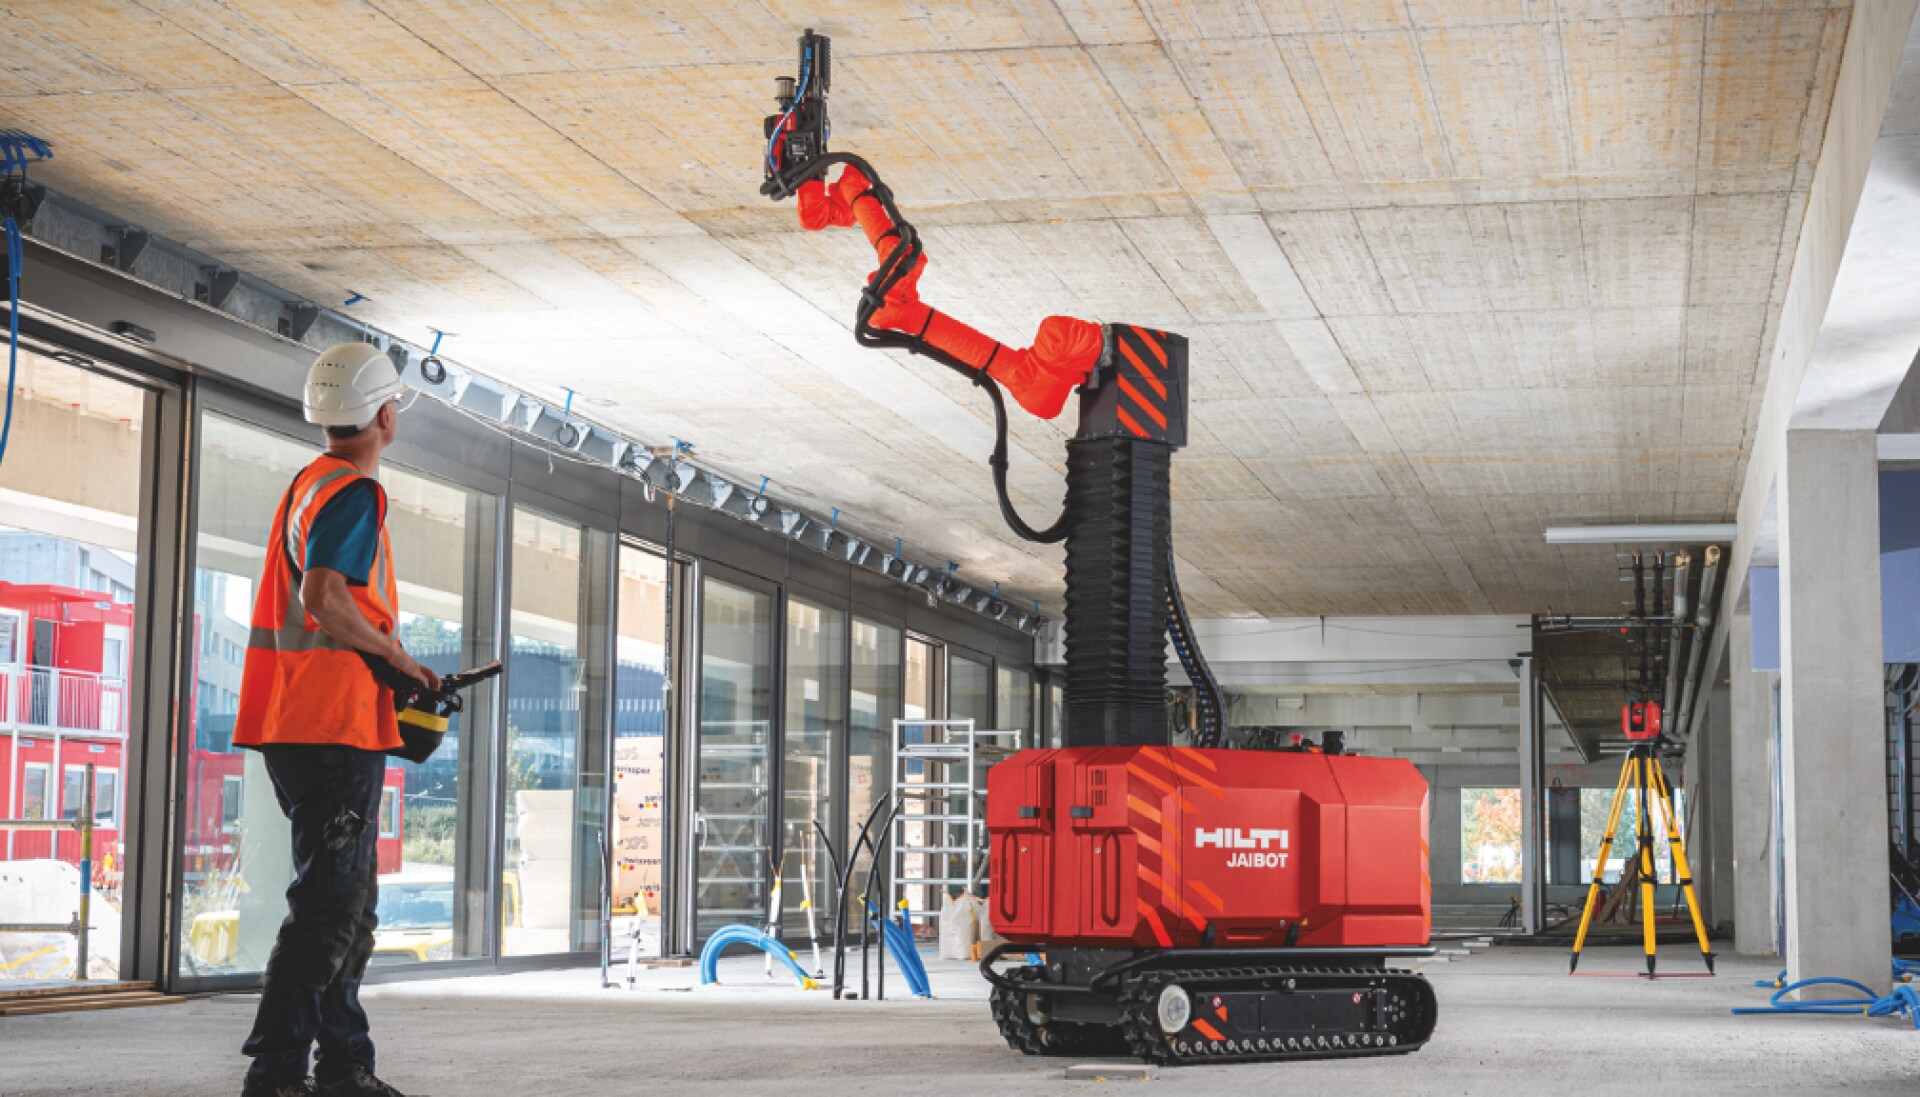 Construction worker safely operating ceiling drilling robot Jaibot on a jobsite